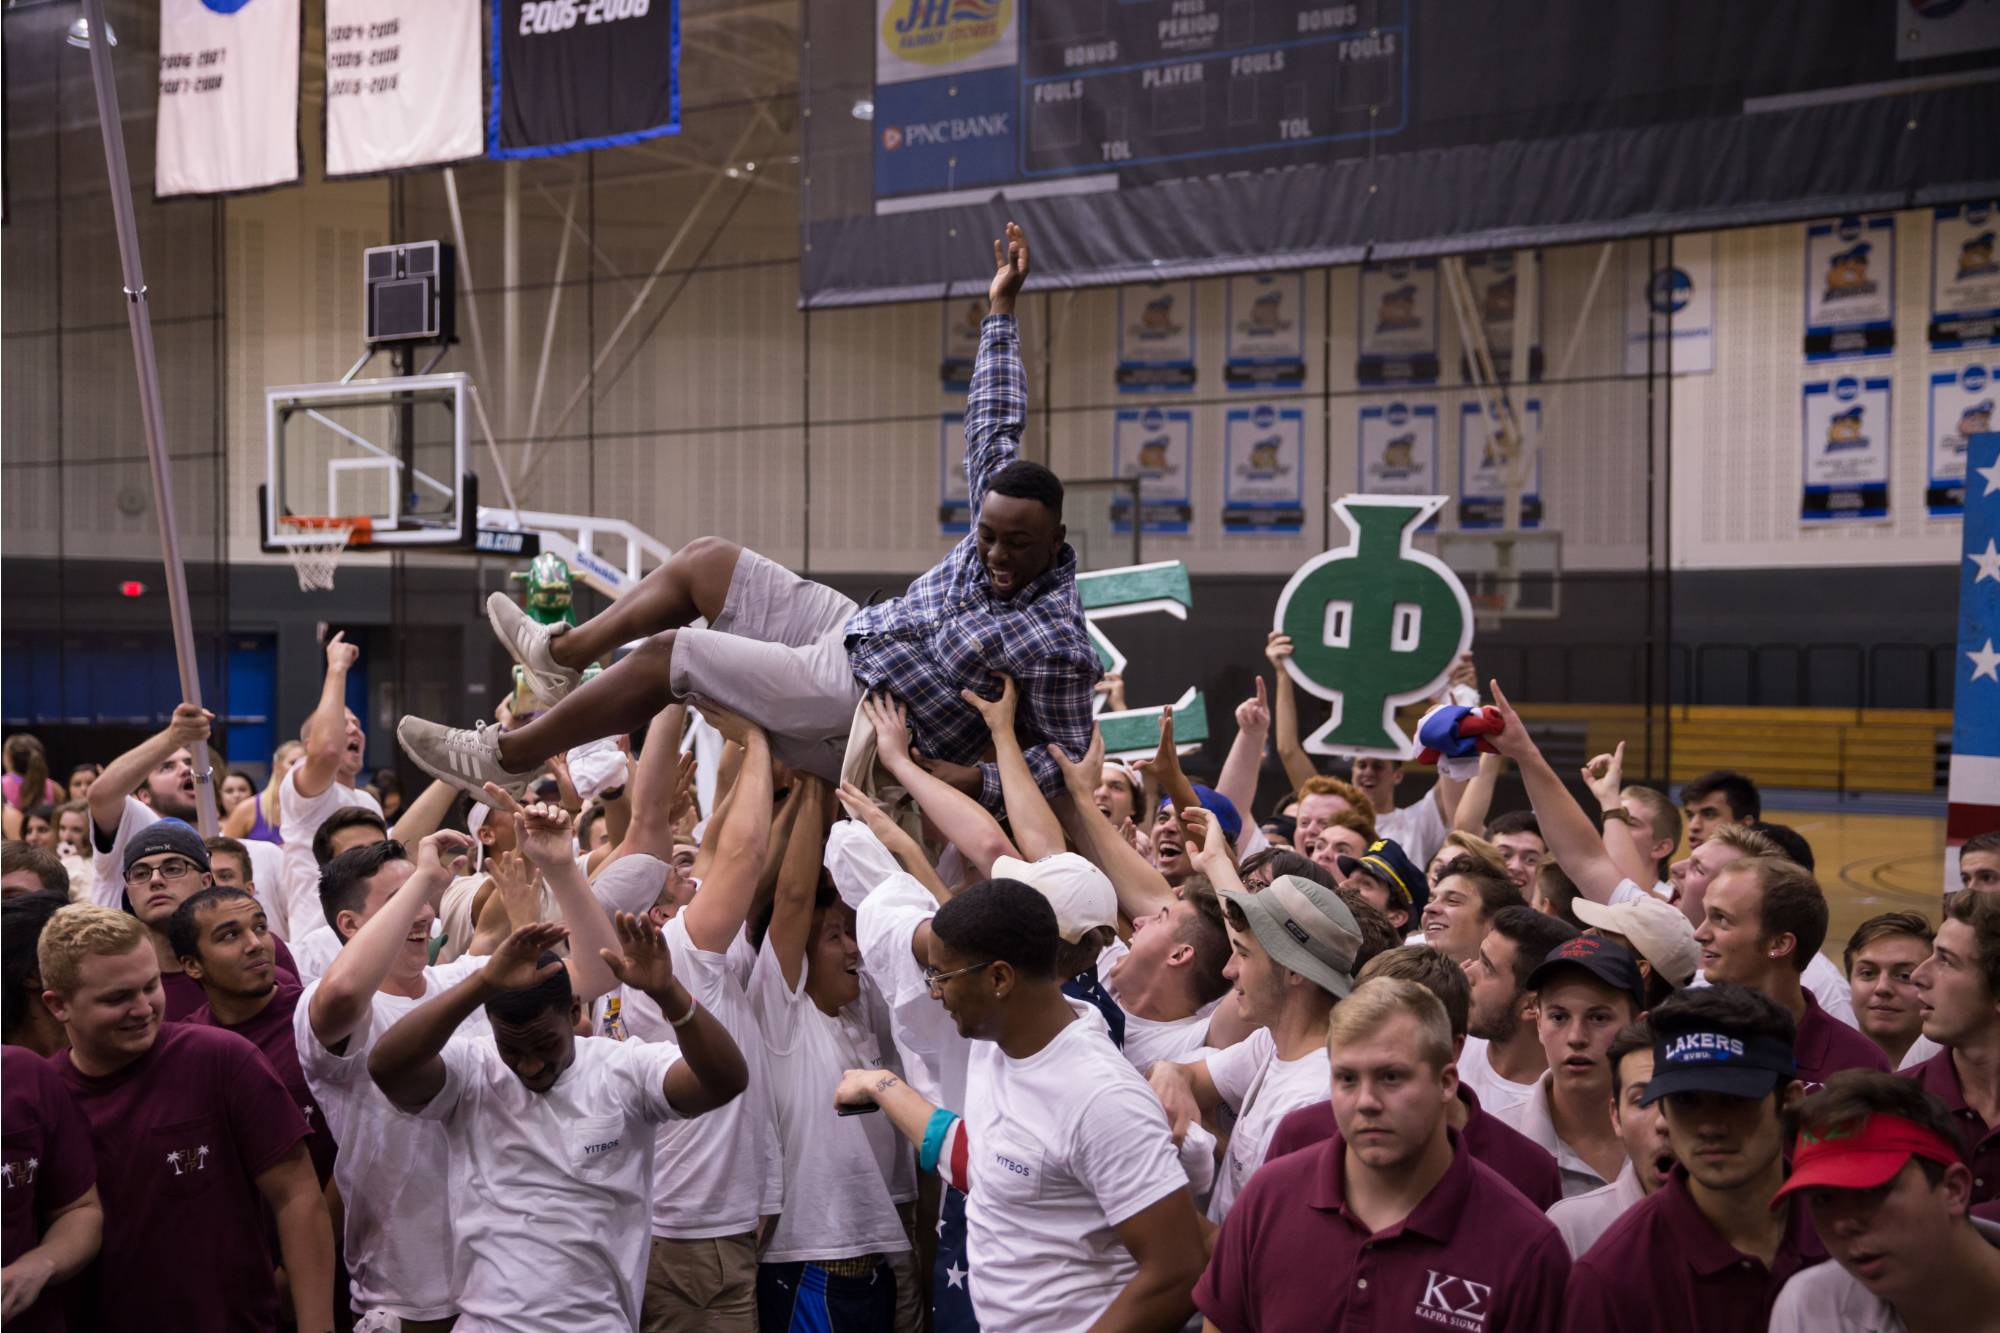 A student crowd surfing at IFC Bid Day